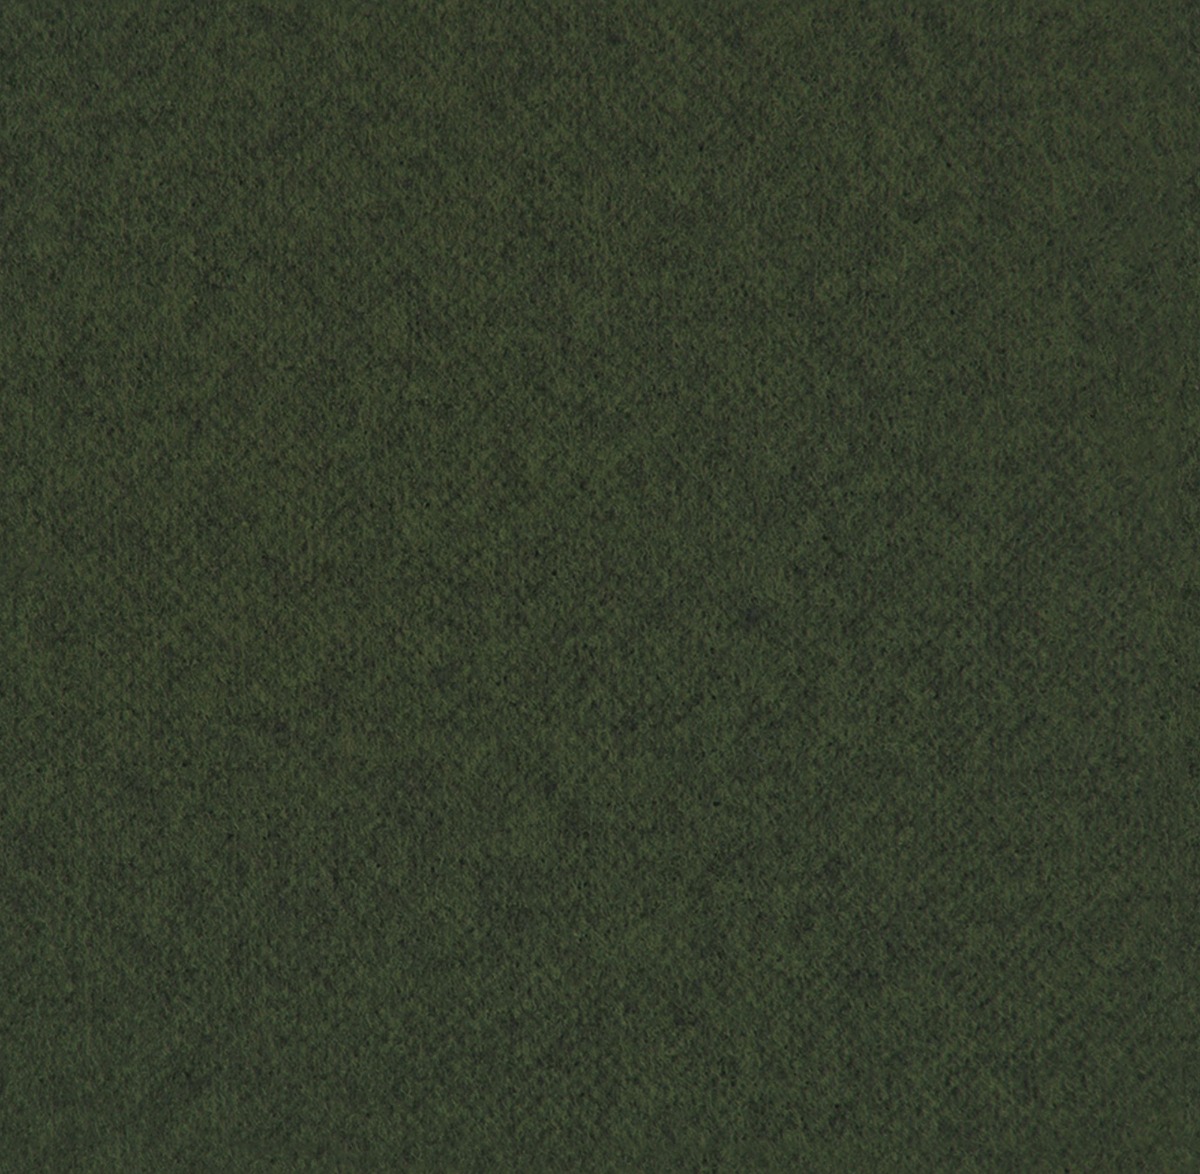 A seamless insulation texture with acoustic tile in gherkin units arranged in a None pattern